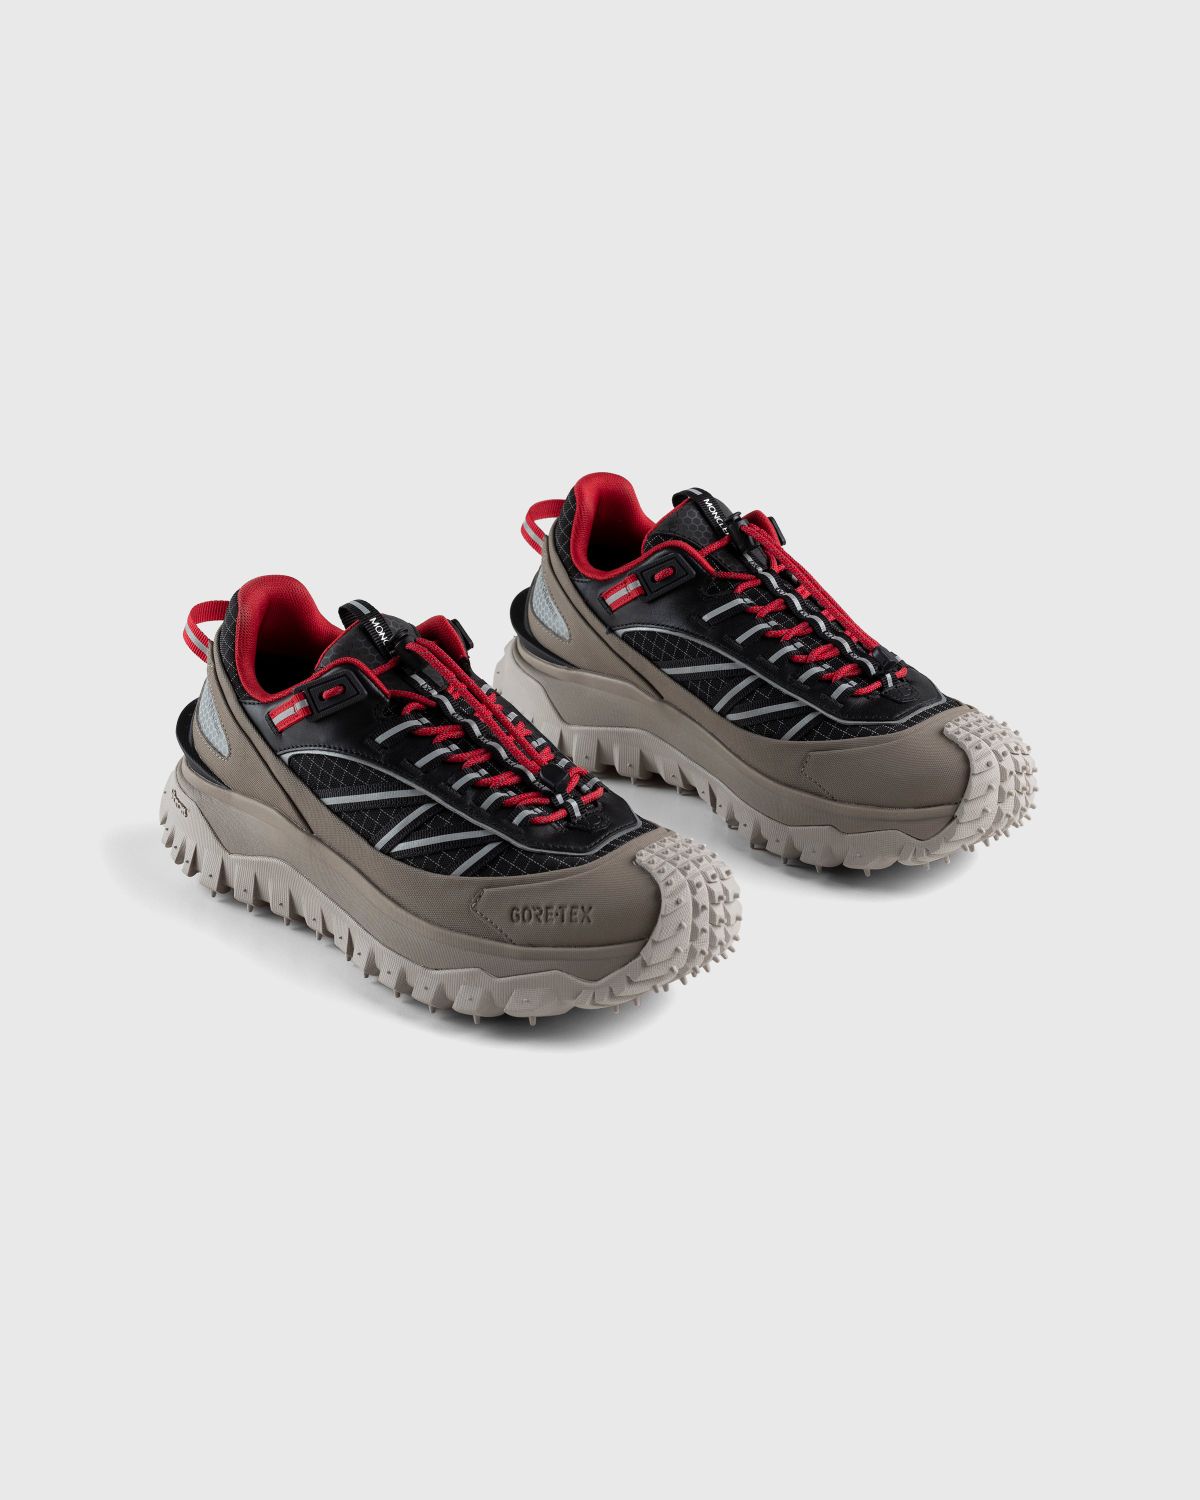 Moncler – Trailgrip GTX Sneakers Taupe - Sneakers - Beige - Image 3